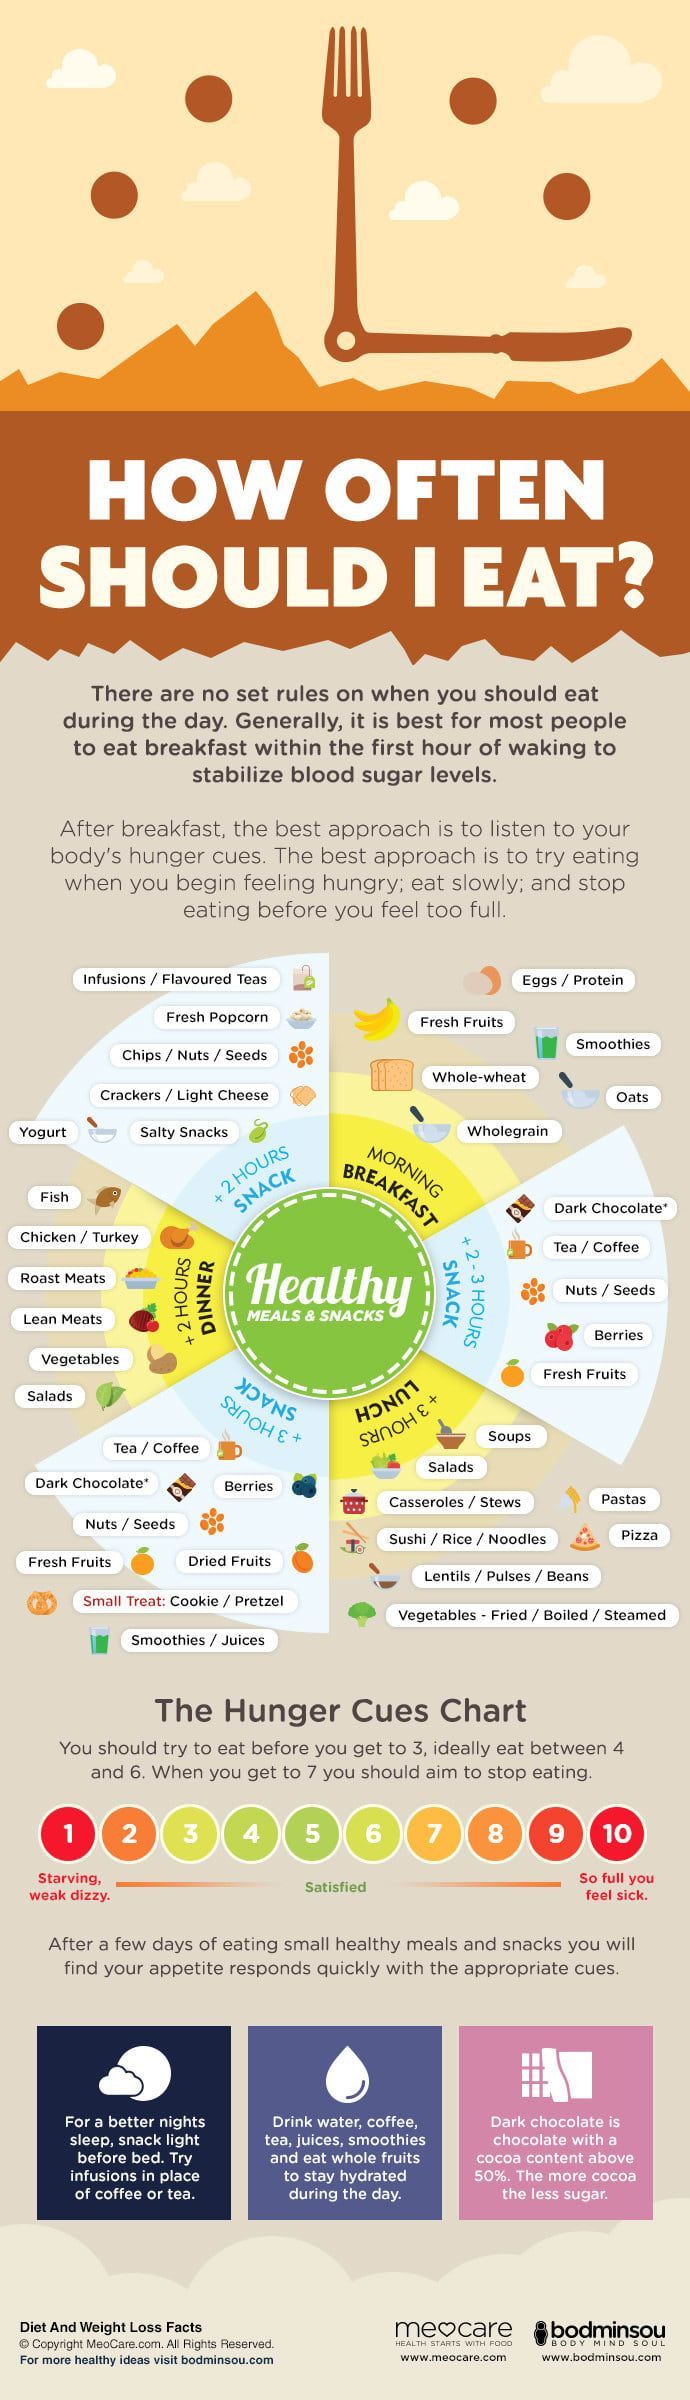 Of course everyone’s appetite is different, but these suggestions can be so helpful for anyone who’s trying to put some more